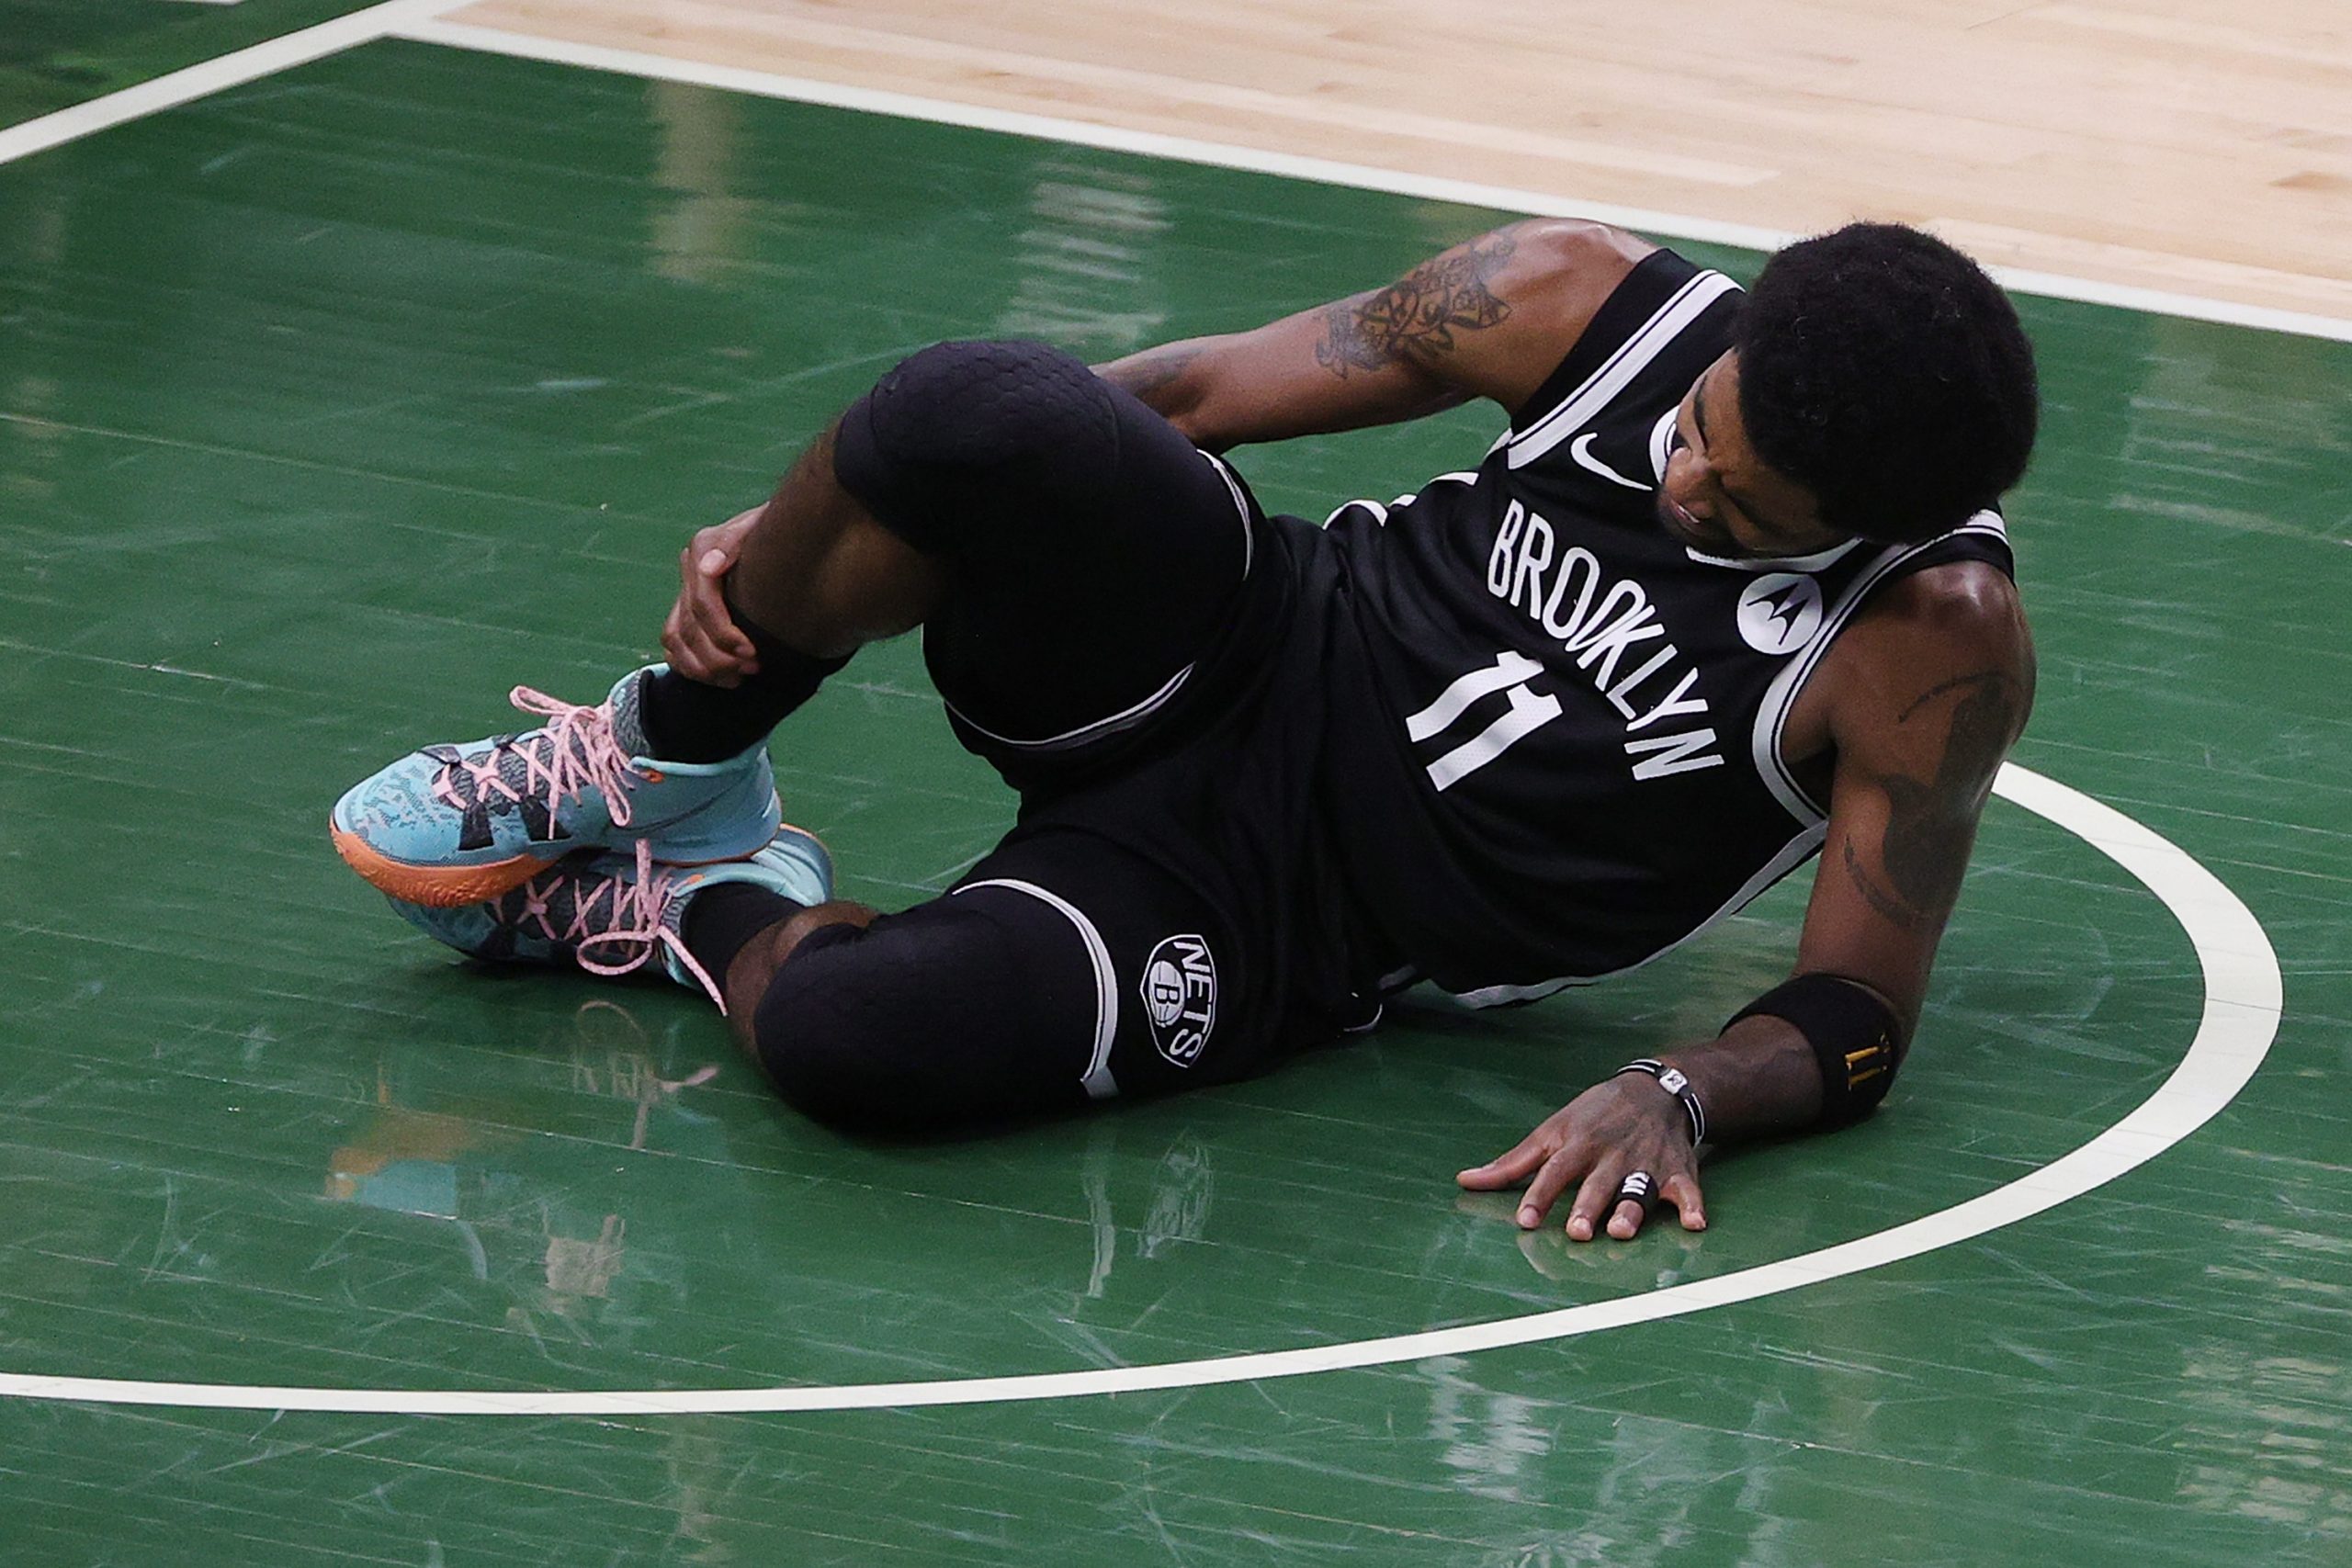 A former Boston Celtics player suggested Kyrie Irving's ankle injury suffered Sunday was karma.